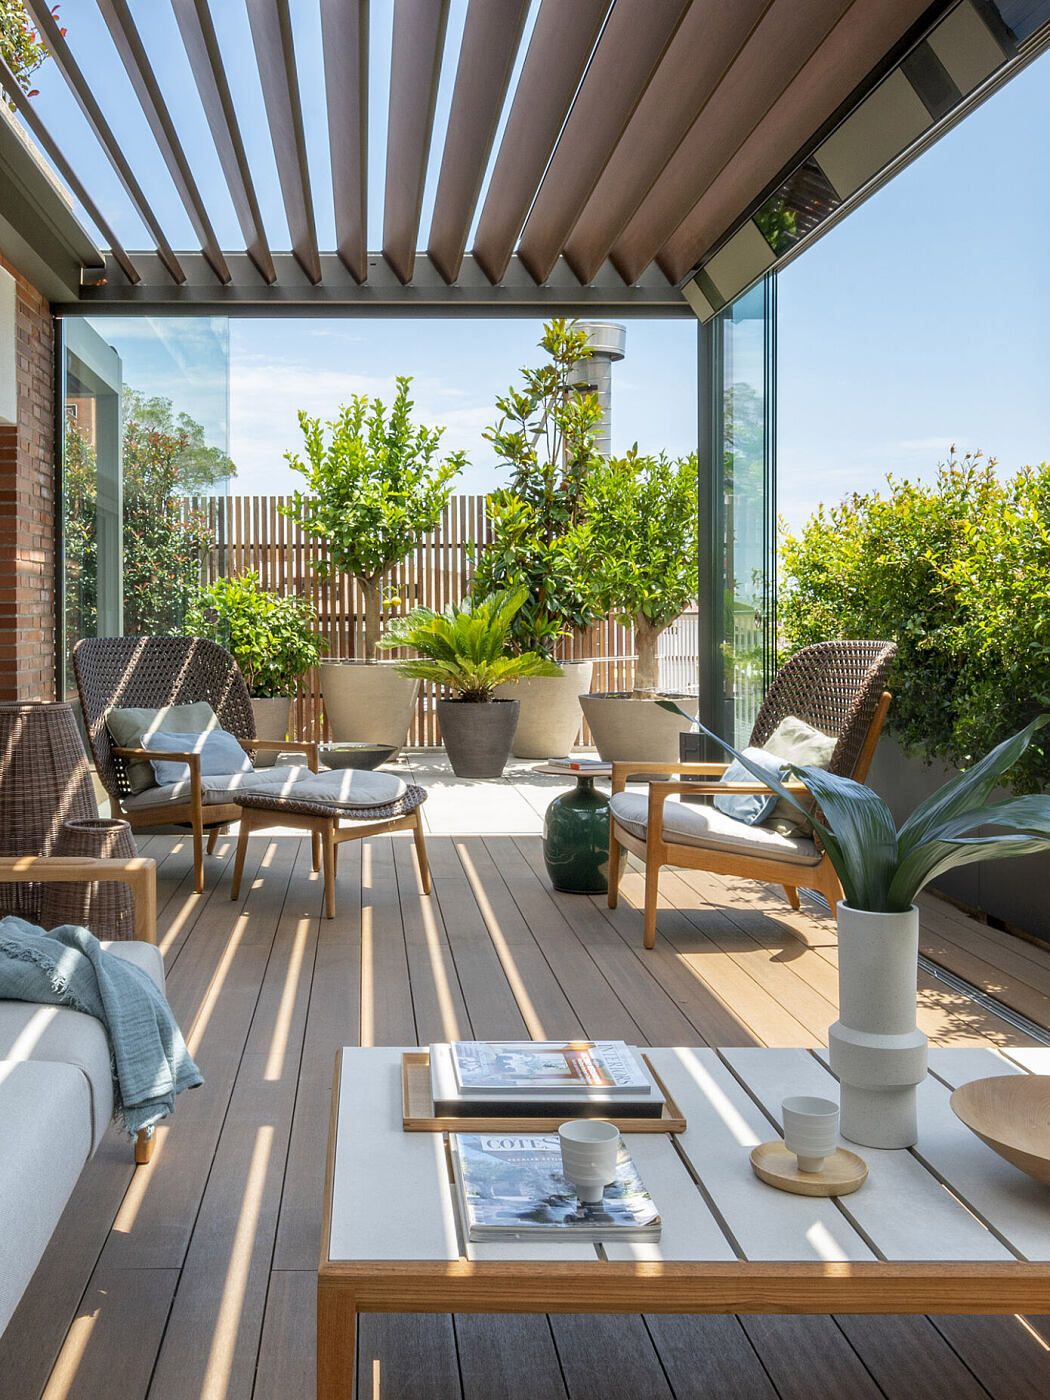 Creating a Beautiful Roof Garden: Design Tips for an Urban Oasis